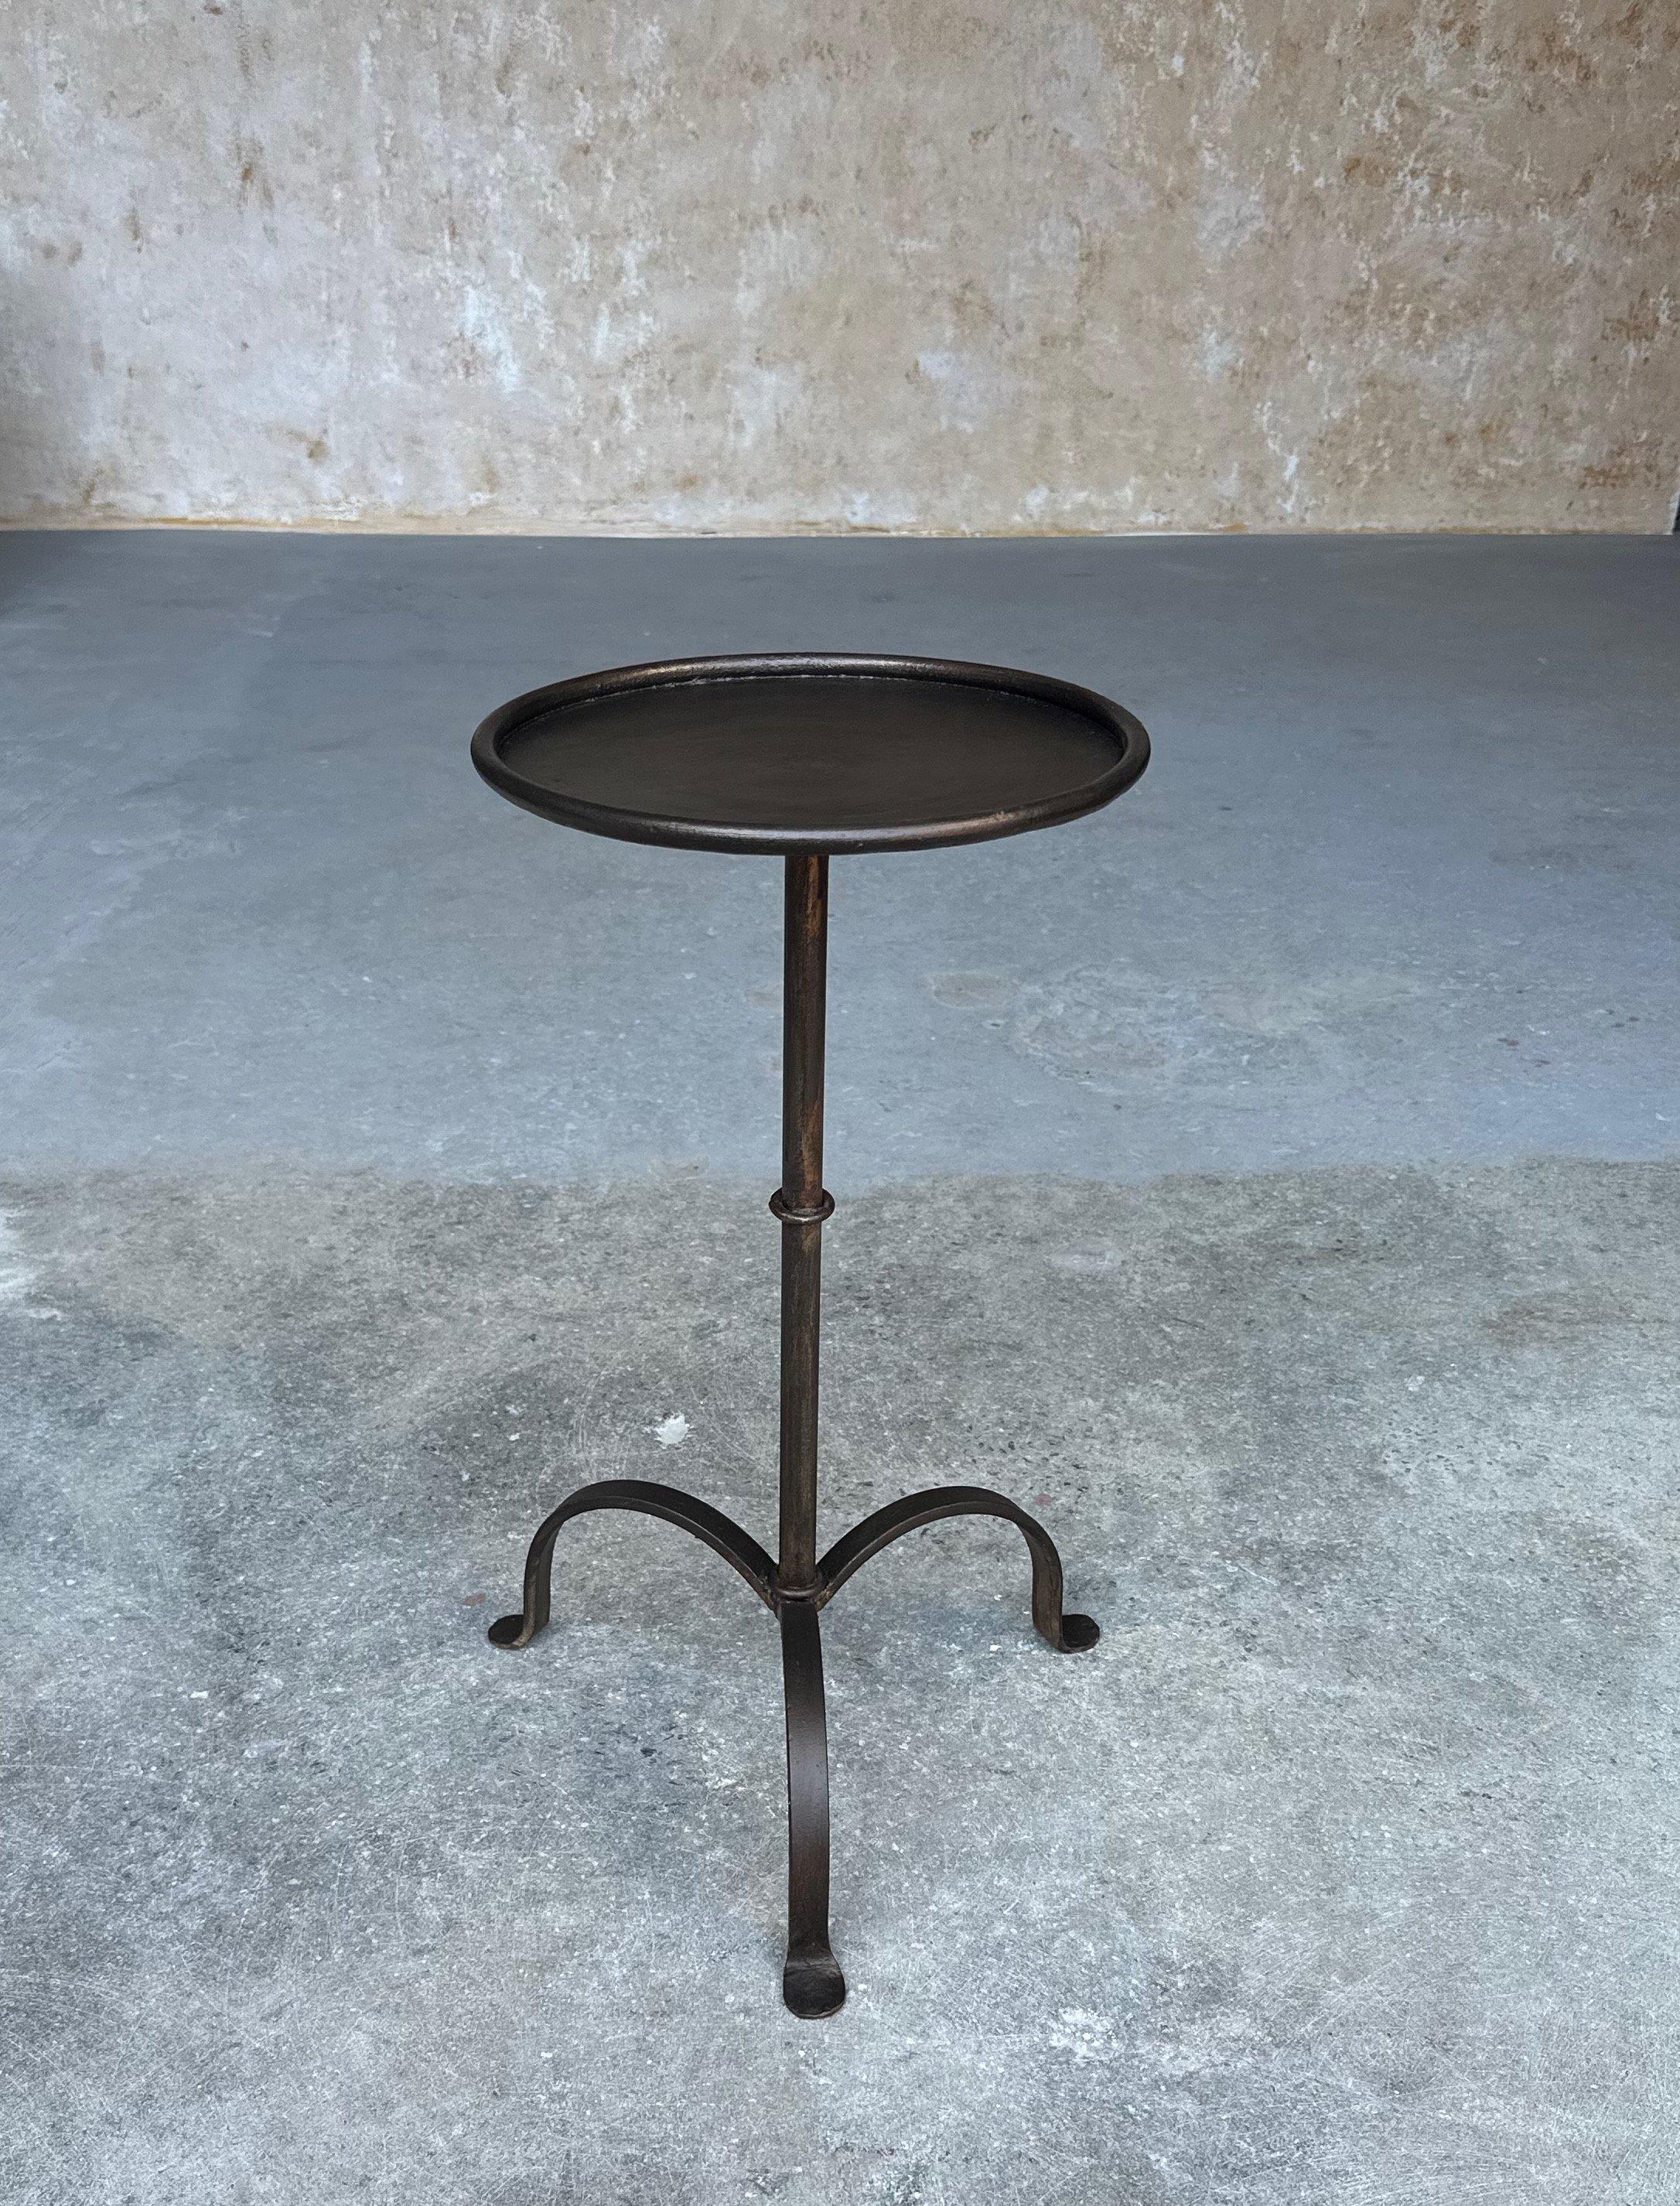 This recently handcrafted small Spanish iron end table is not only elegant but functional. Based on a vintage 1950s design, it features a circular stem highlighted by a central ring accent that serves as a decorative enhancement. Recently created by